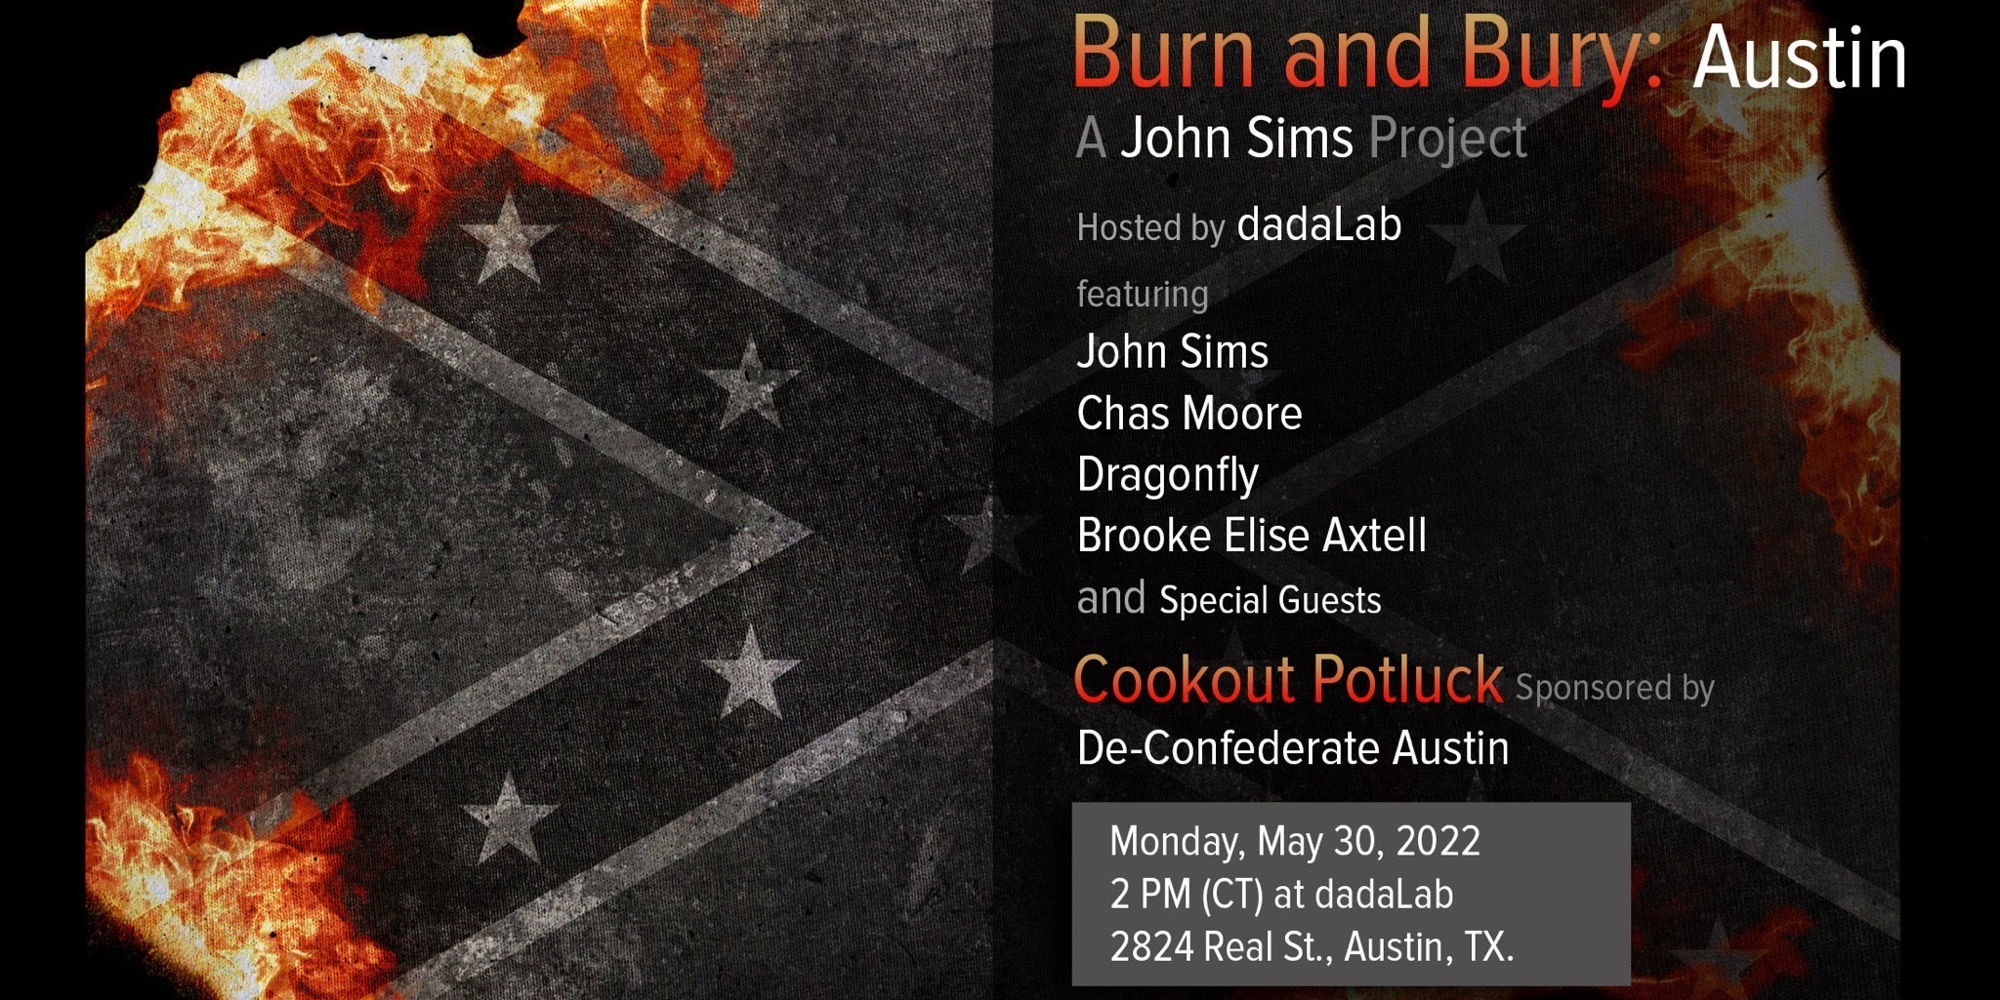 Burn and Bury: Austin - A John Sims Project promotional image